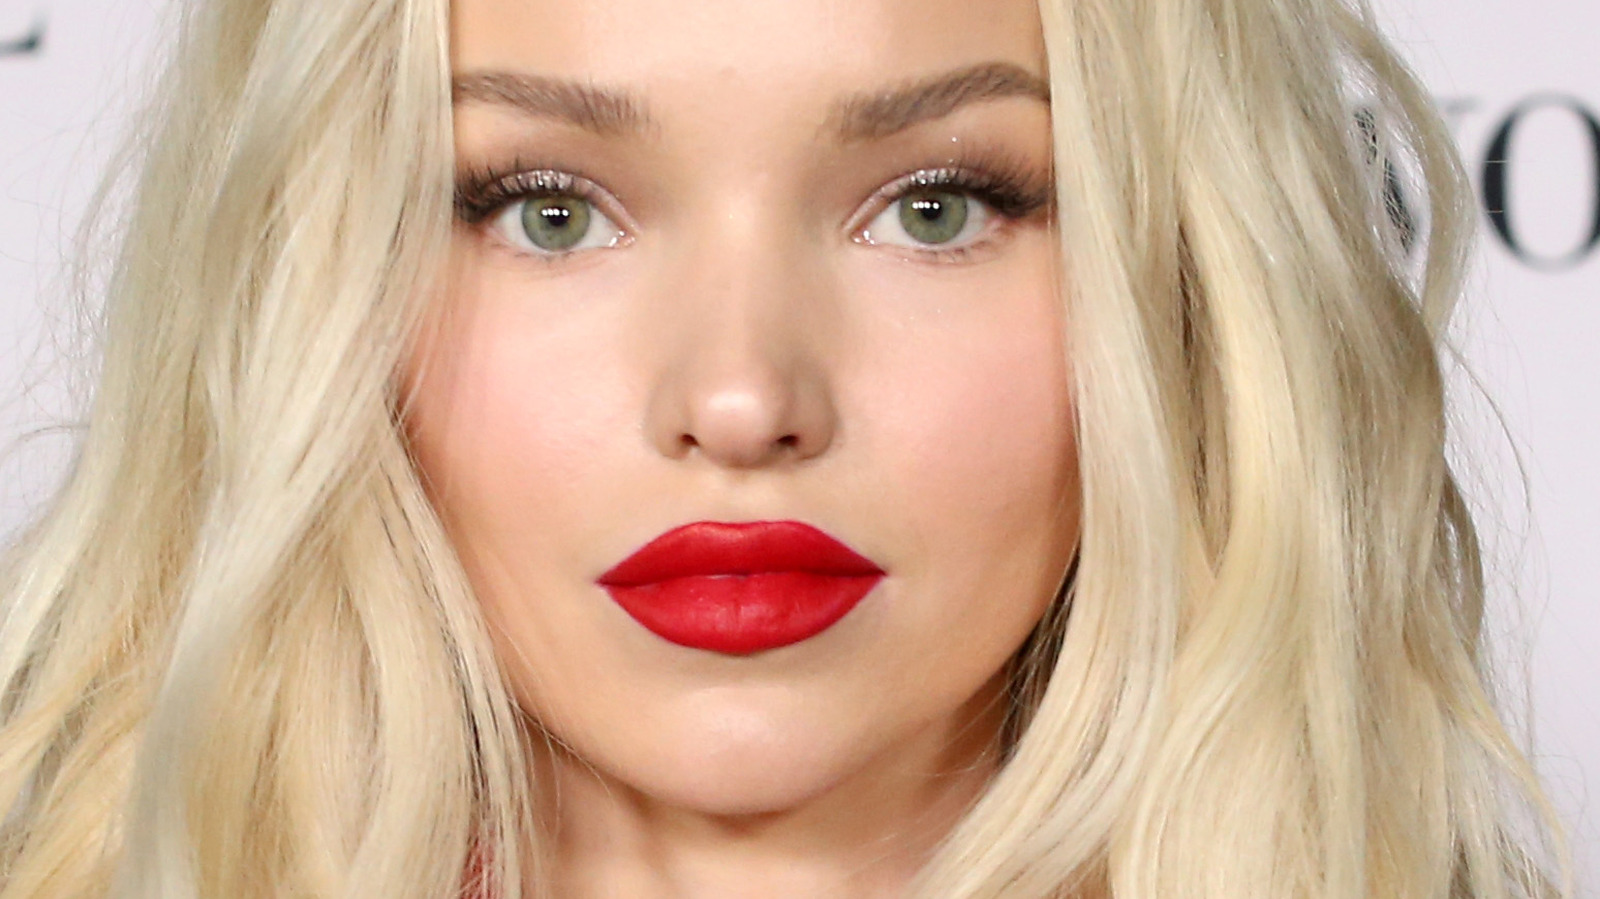 Dove Cameron Gods Game Lyrics know the real meaning of Dove